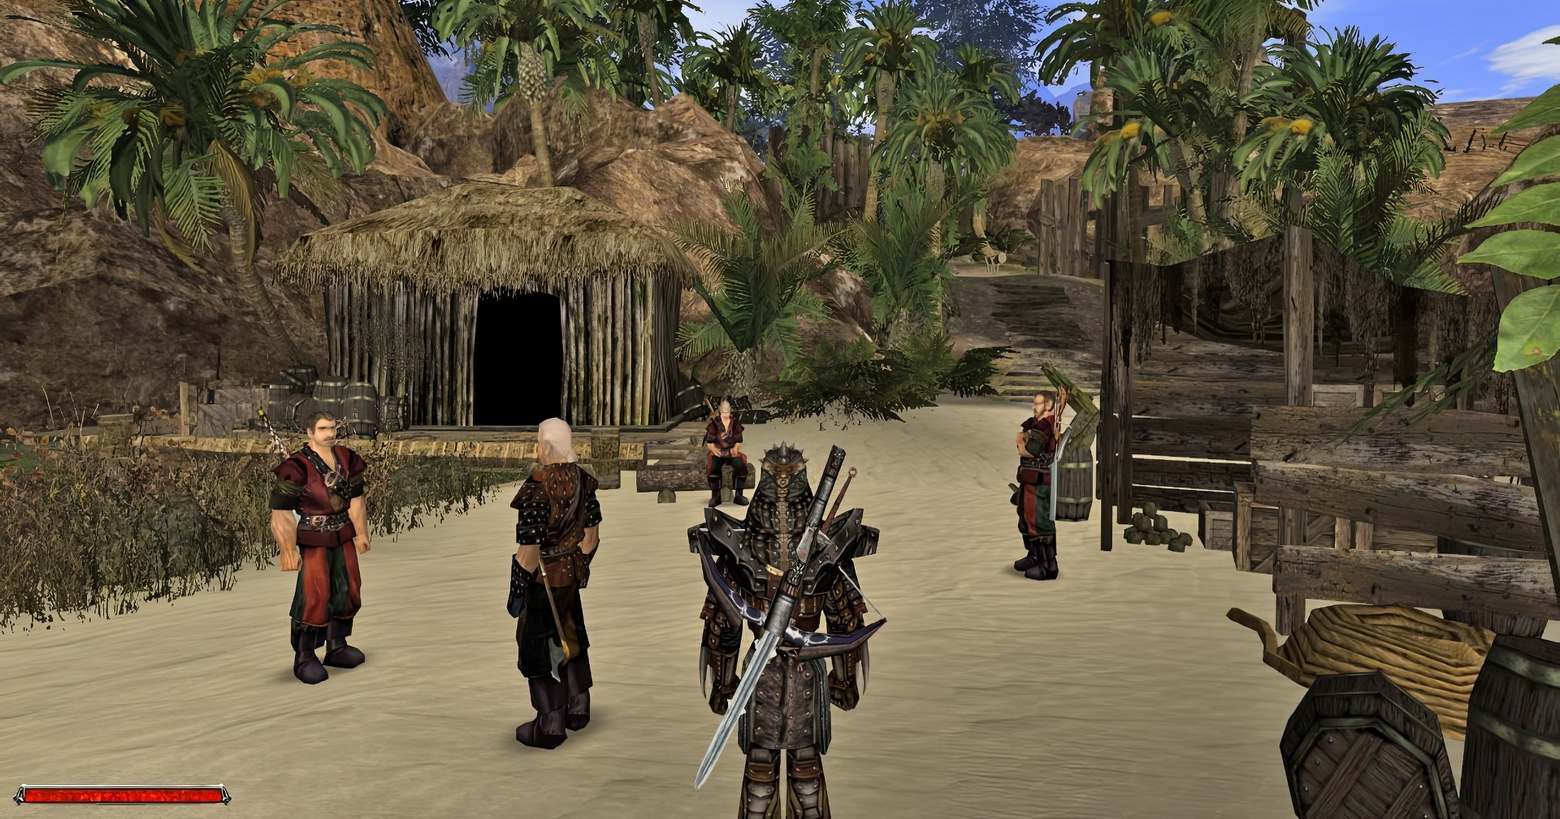 This screenshot shows the player in a third-person mode in the wide shot at the bottom center of the screen. He wears a brown leather-like armor with very rigid shoulder pieces. On his back, he carries a very long iron sword. He stands in the daytime in a medieval village in a palm landscape with sandy soil. At the back left a wooden hut with a thatched roof is depicted. Directly in front of him are four characters standing around looking at each other. On the right, wooden objects such as barrels can be seen and brown rocks rise in the background. At the bottom left, we again see a plain red health bar, but this time much smaller in the corner. At the top of the image, we can see the blue sky with scattered clouds. Gothic 1+2 for Nintendo Switch will probably be released in 2023.